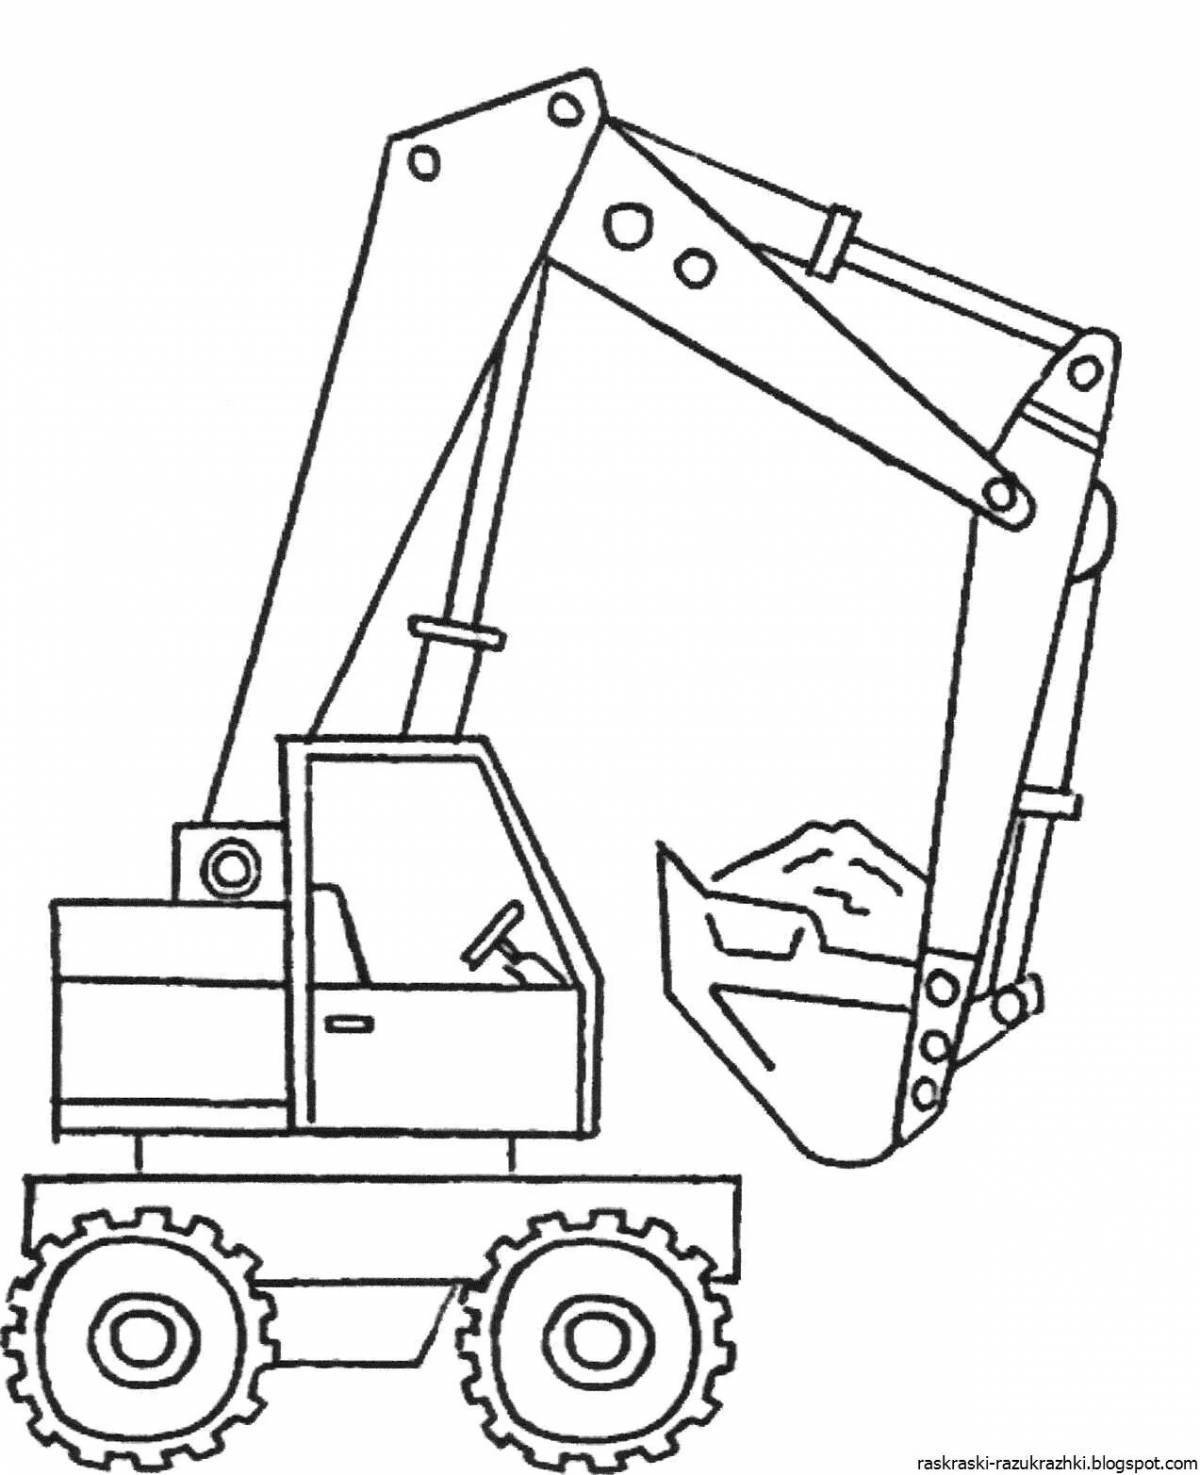 Funny excavator coloring book for preschoolers 2-3 years old